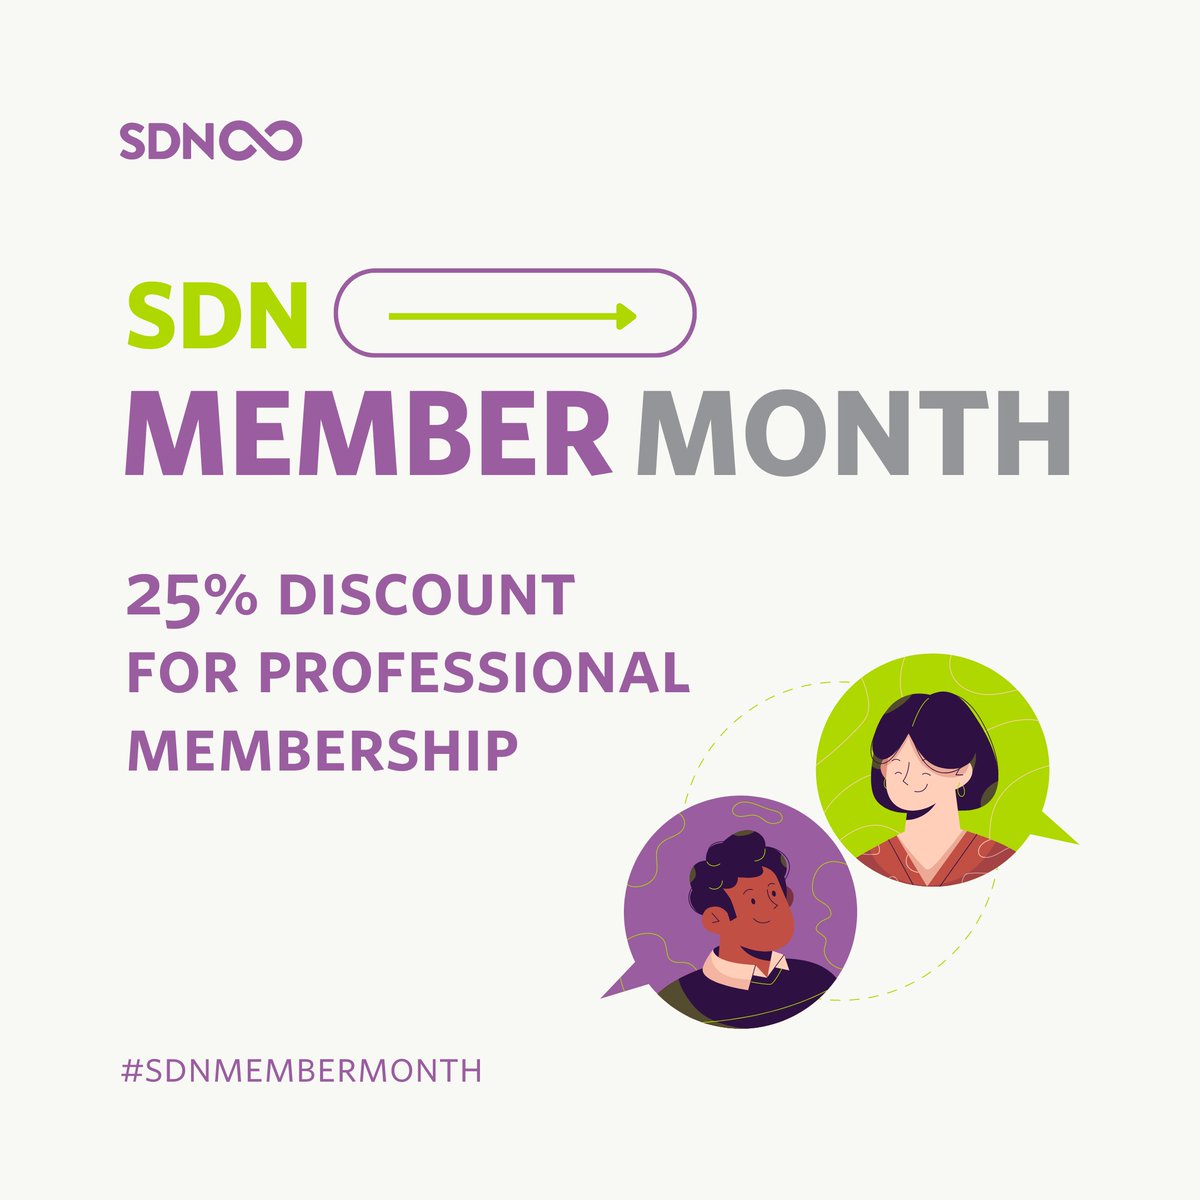 In May, the SDN is offering great discounts, 25% off on its professional and student membership fees. Visit the link here to know more about member month: service-design-network.org/headlines/memb… #ServiceDesign #DesignThinking #Design #SDNMemberMonth